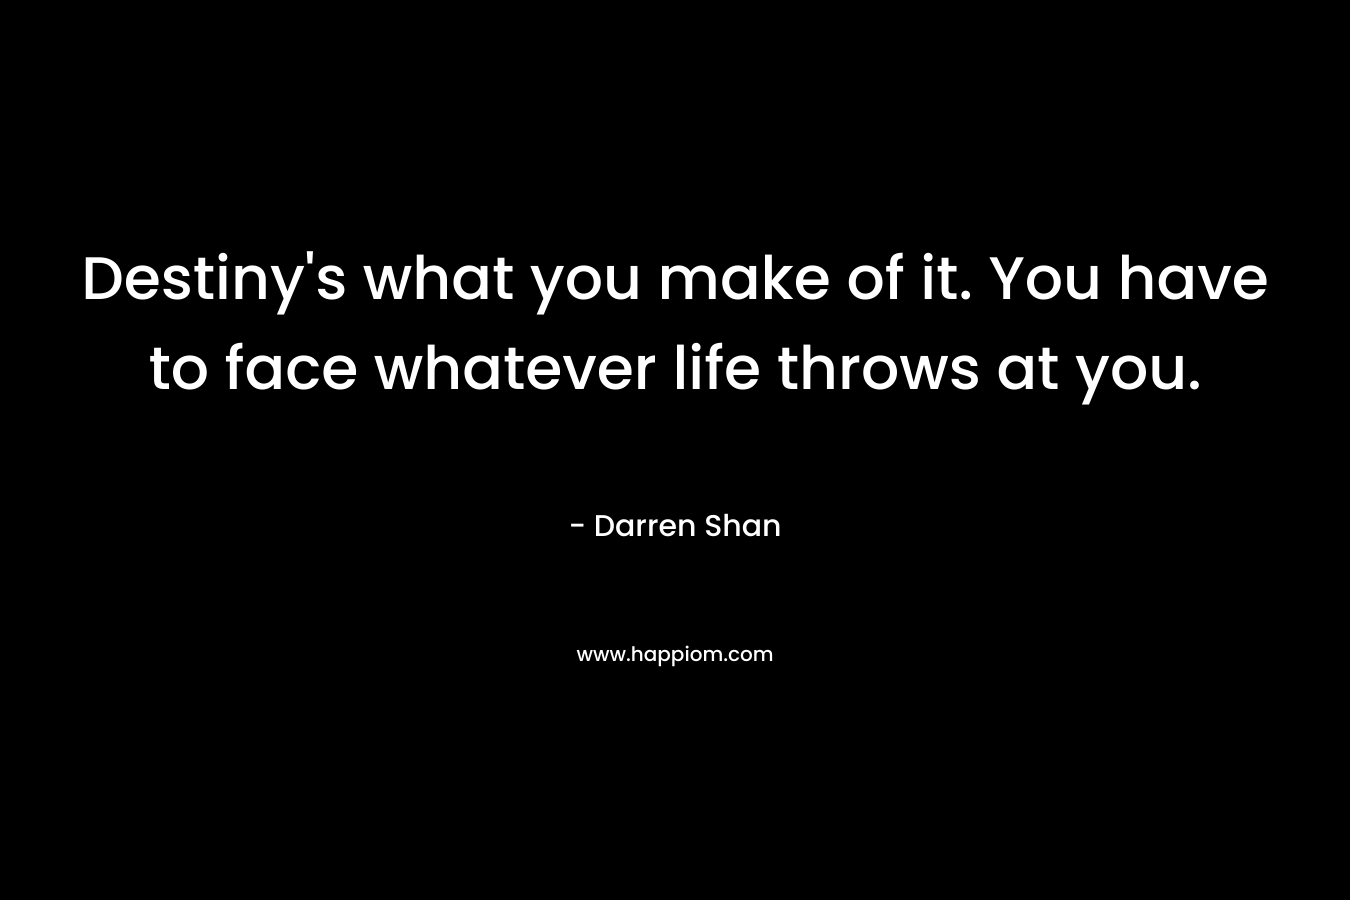 Destiny’s what you make of it. You have to face whatever life throws at you. – Darren Shan